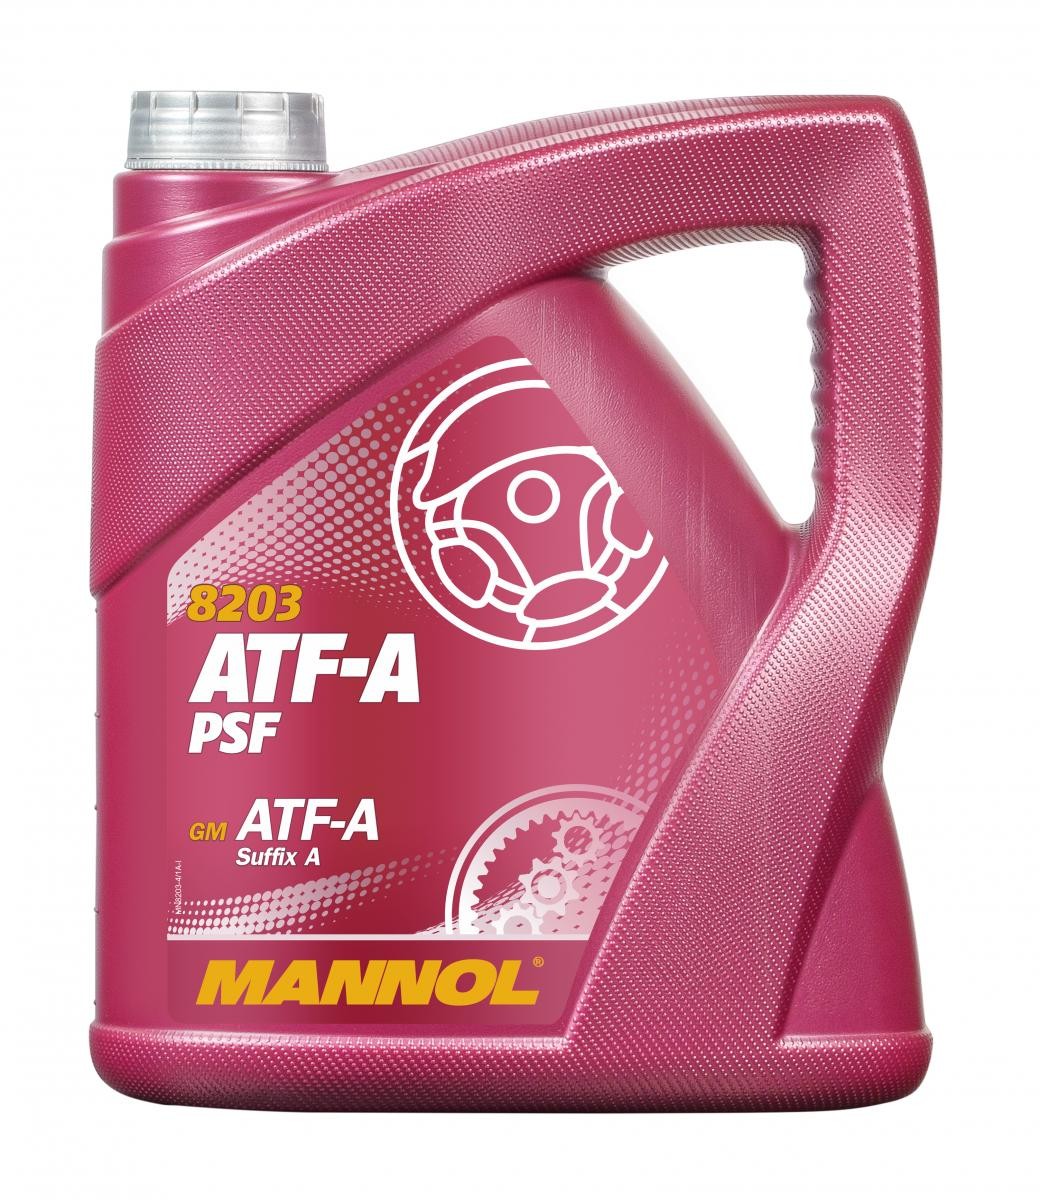 MN8203-4 MANNOL Gearbox oil VW ATF-A, 4l, red